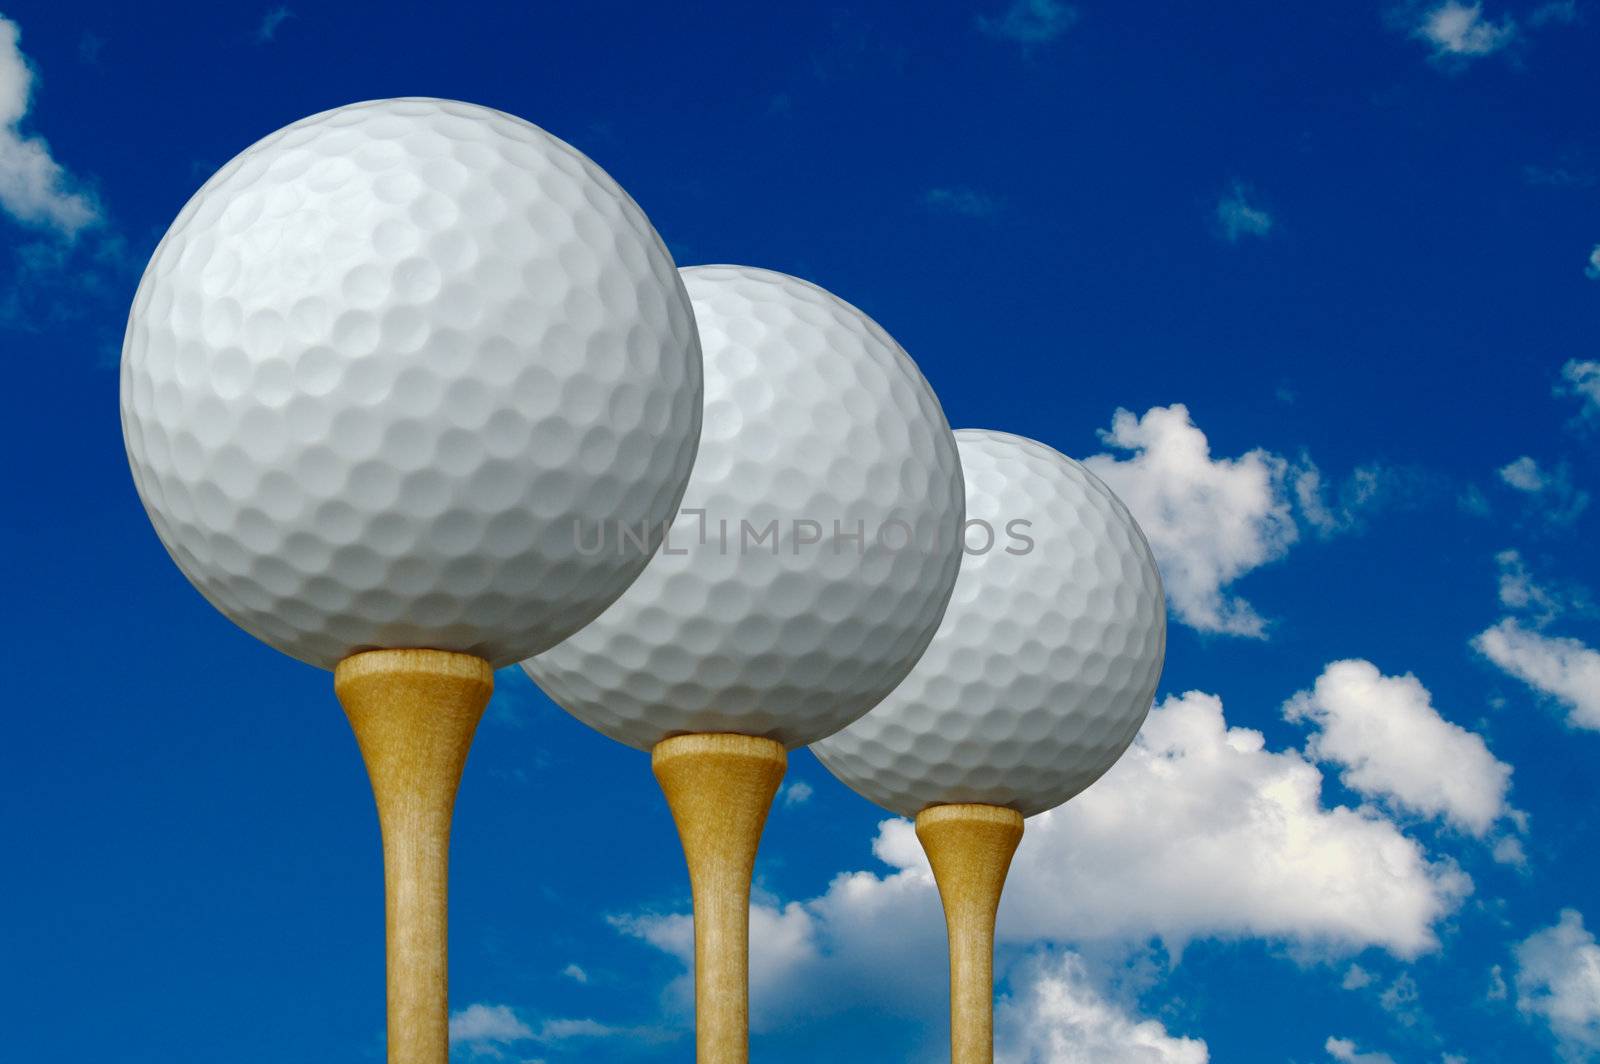 Three Golf Balls & Tees on the left with clouds and sky background.